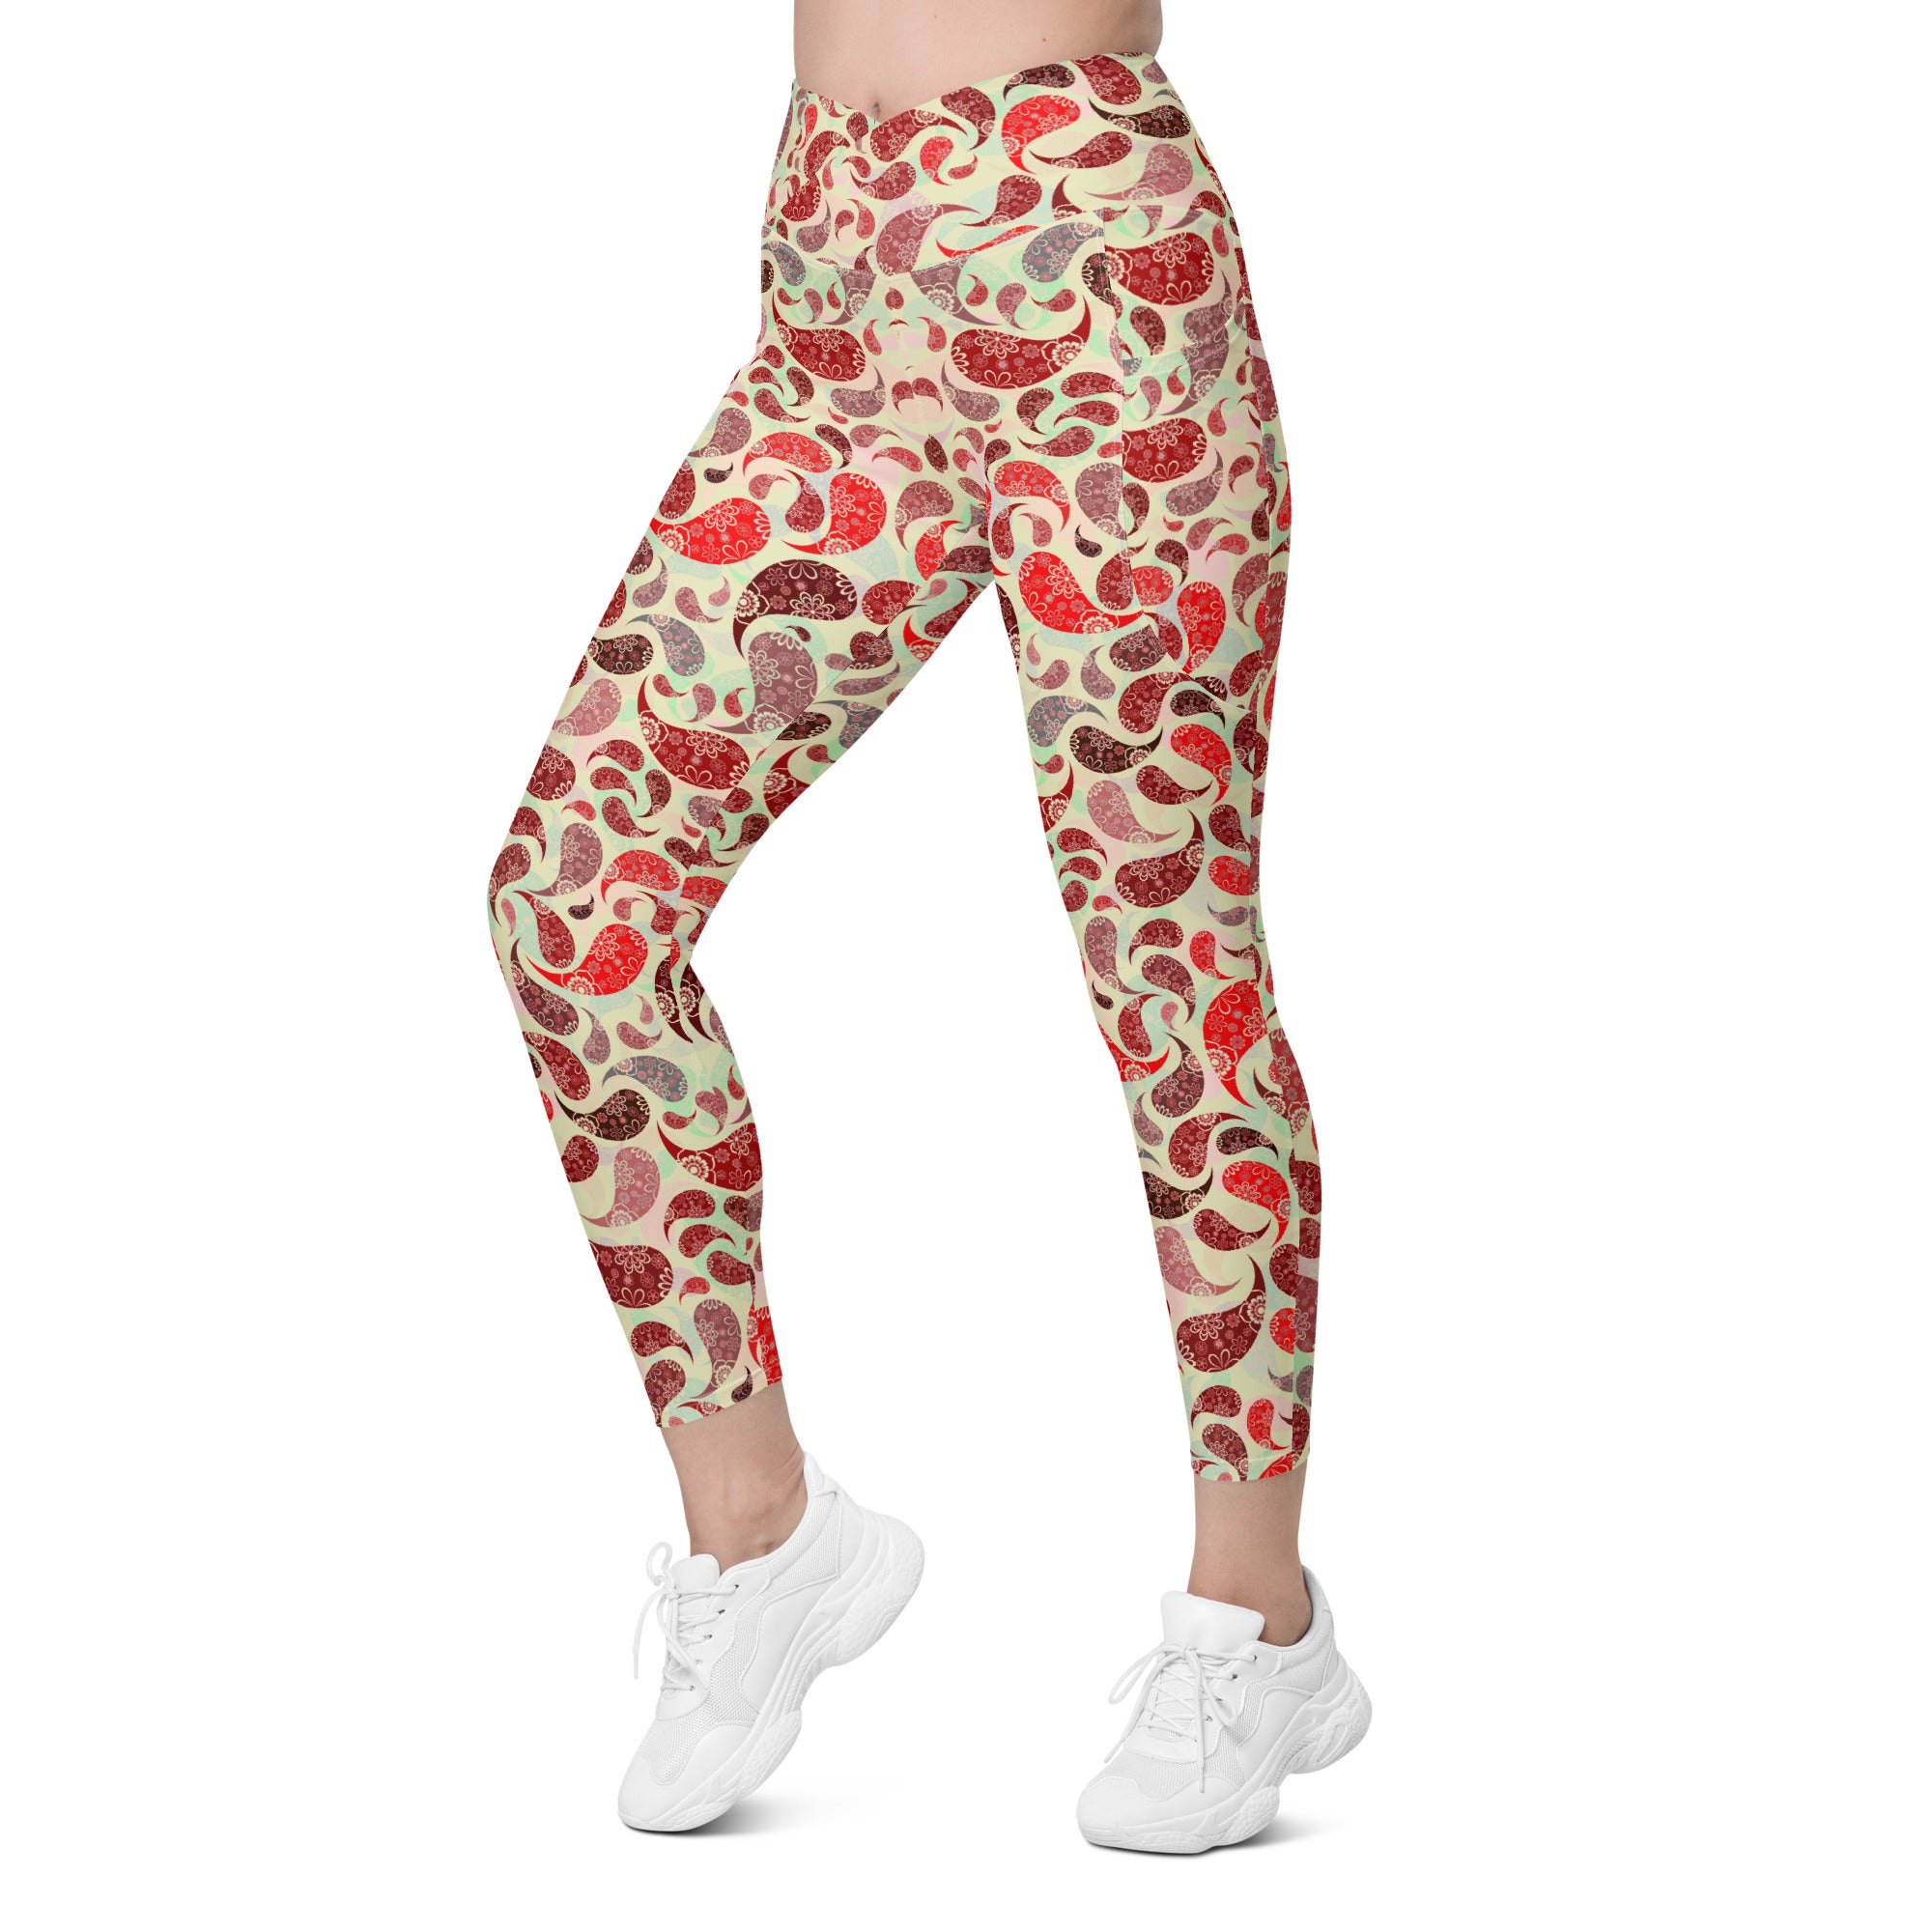 Crossover leggings with pockets- Paisley Red